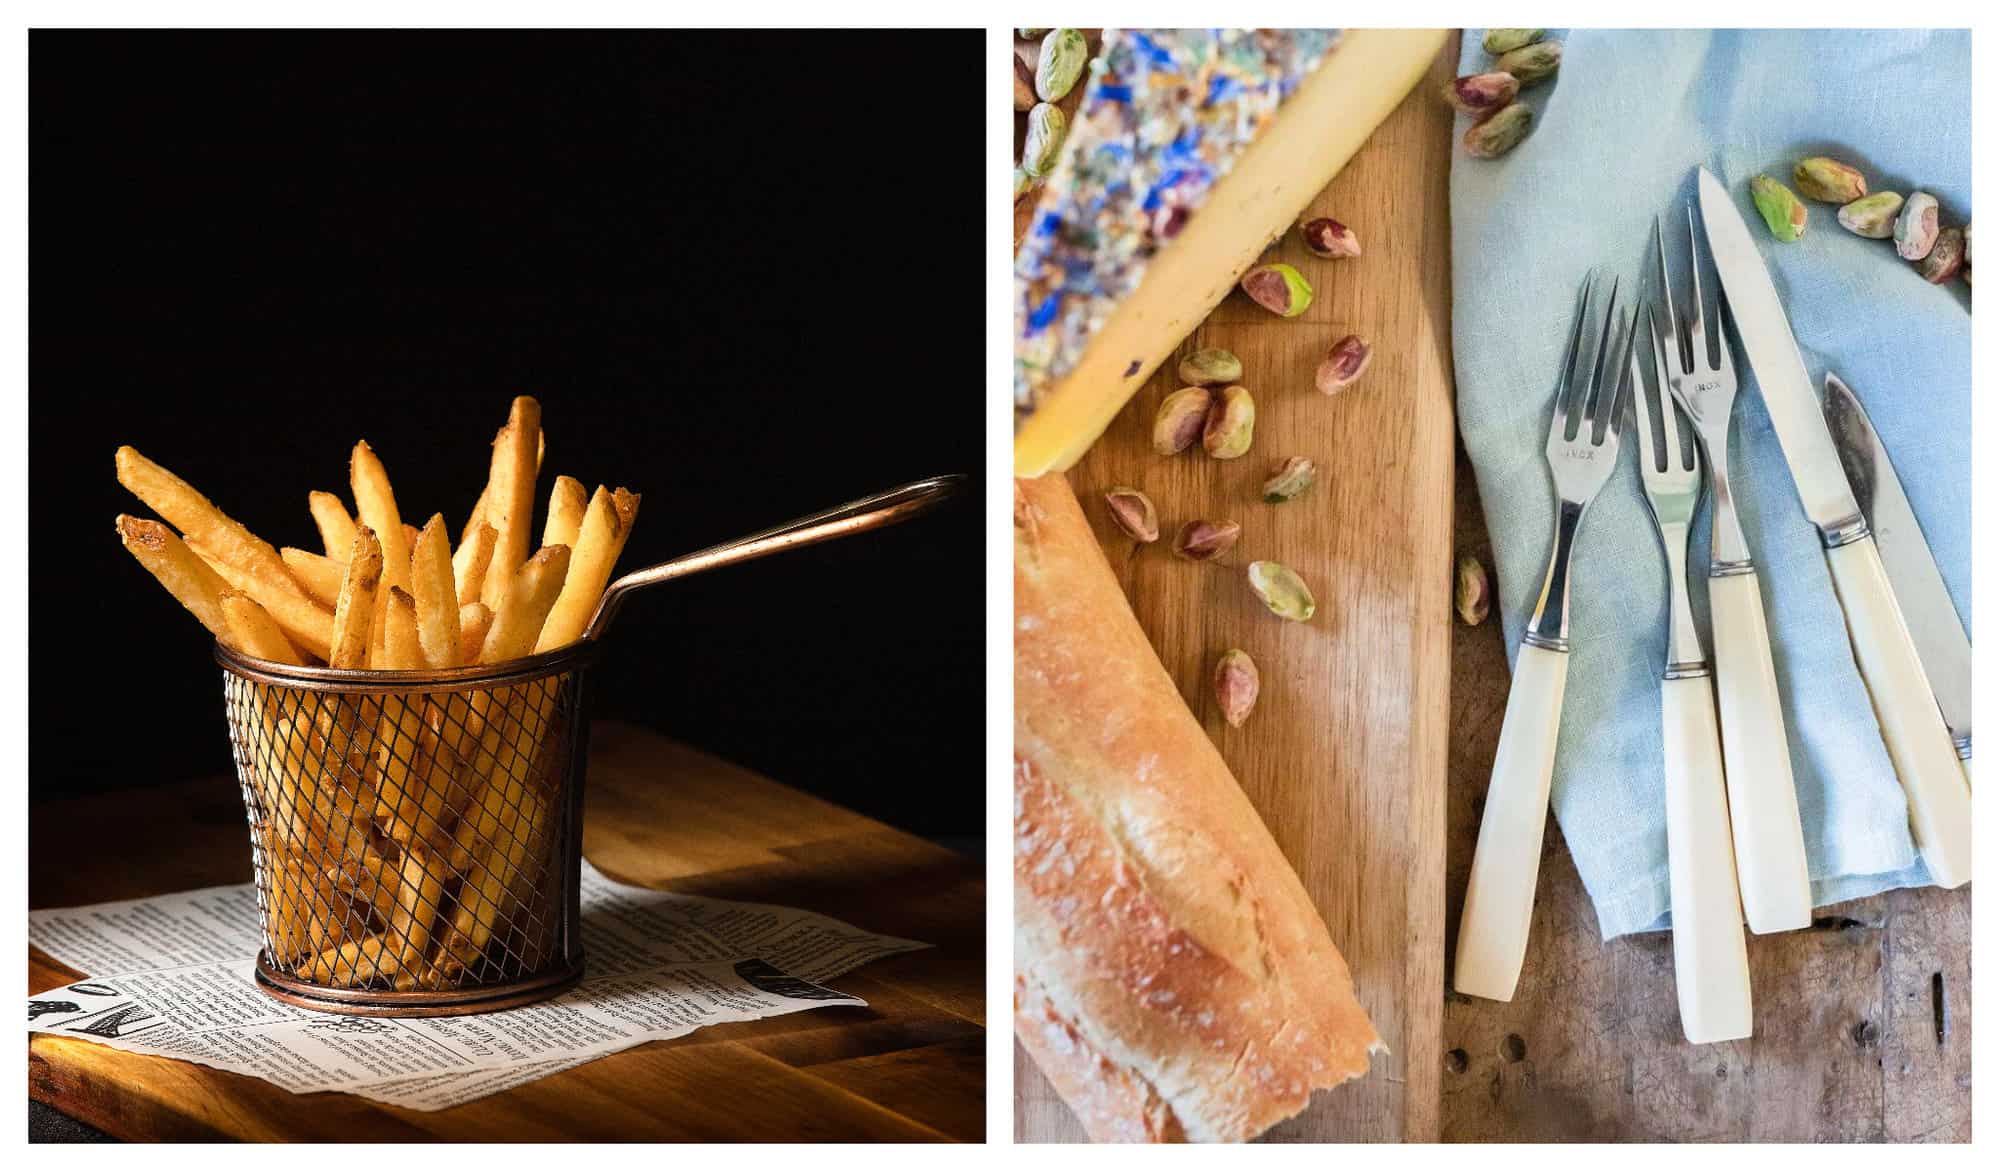 Left: French fries served in the frying basket with newspaper underneath it on a wooden table. Right: A set of cutlery on a light blue cloth next to a baguette and some pistachios scattered around.